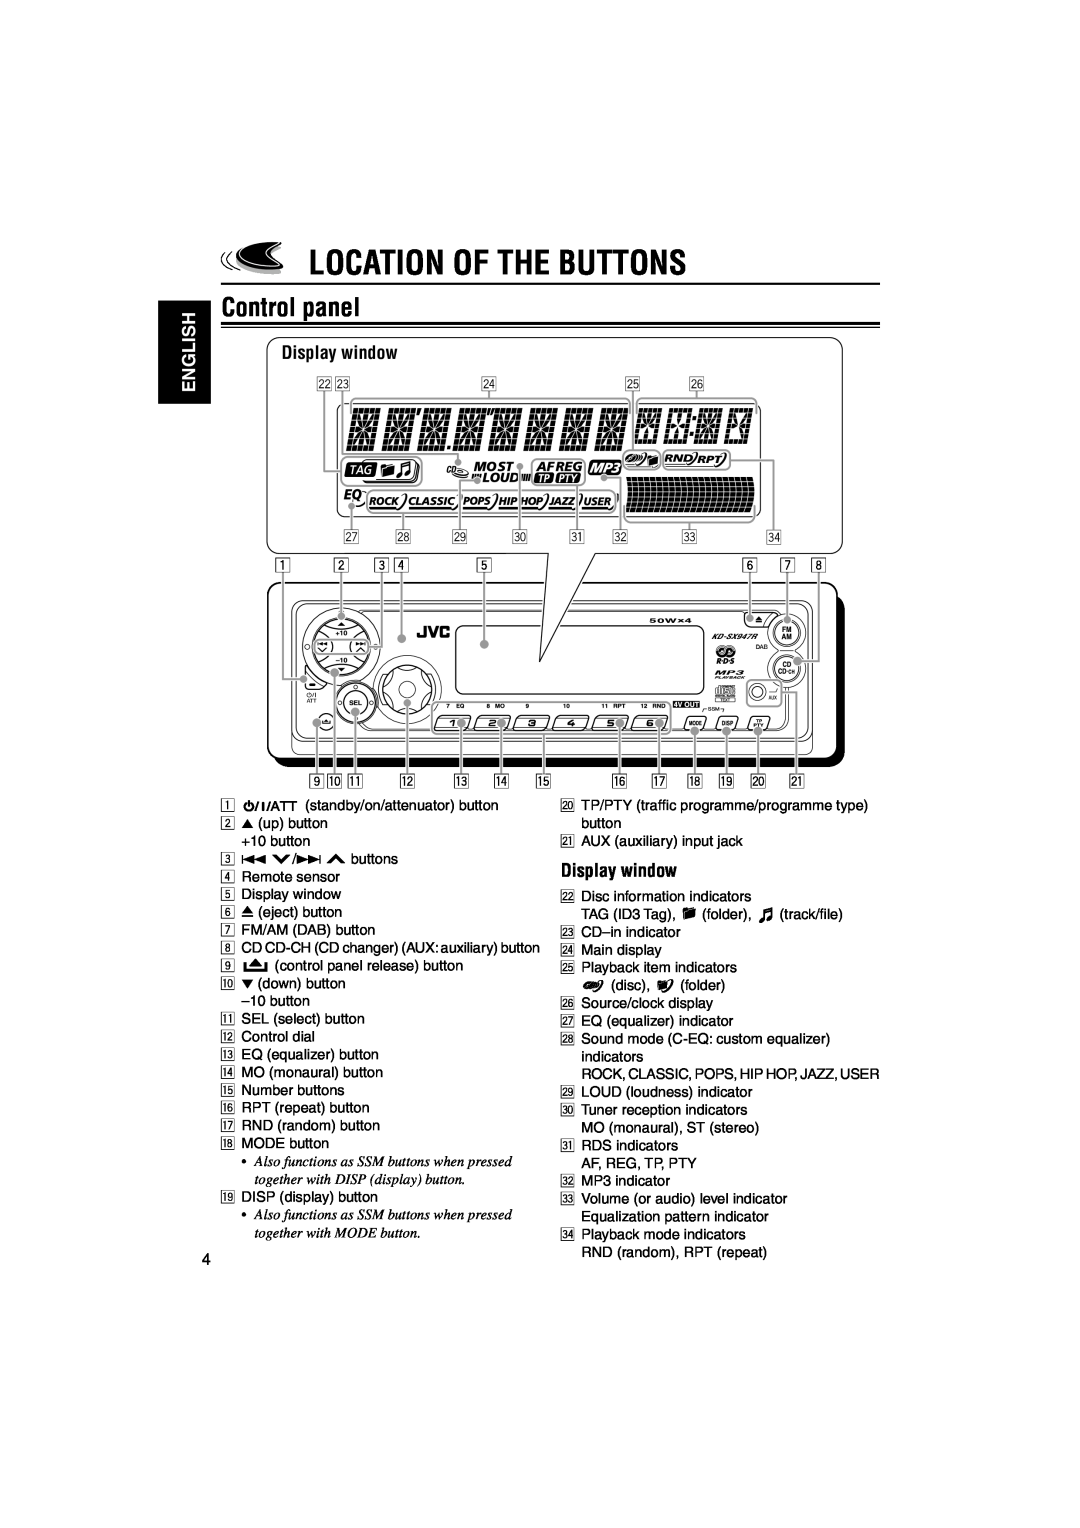 JVC GET0126-001A manual Location Of The Buttons, Control panel, Display window, English 